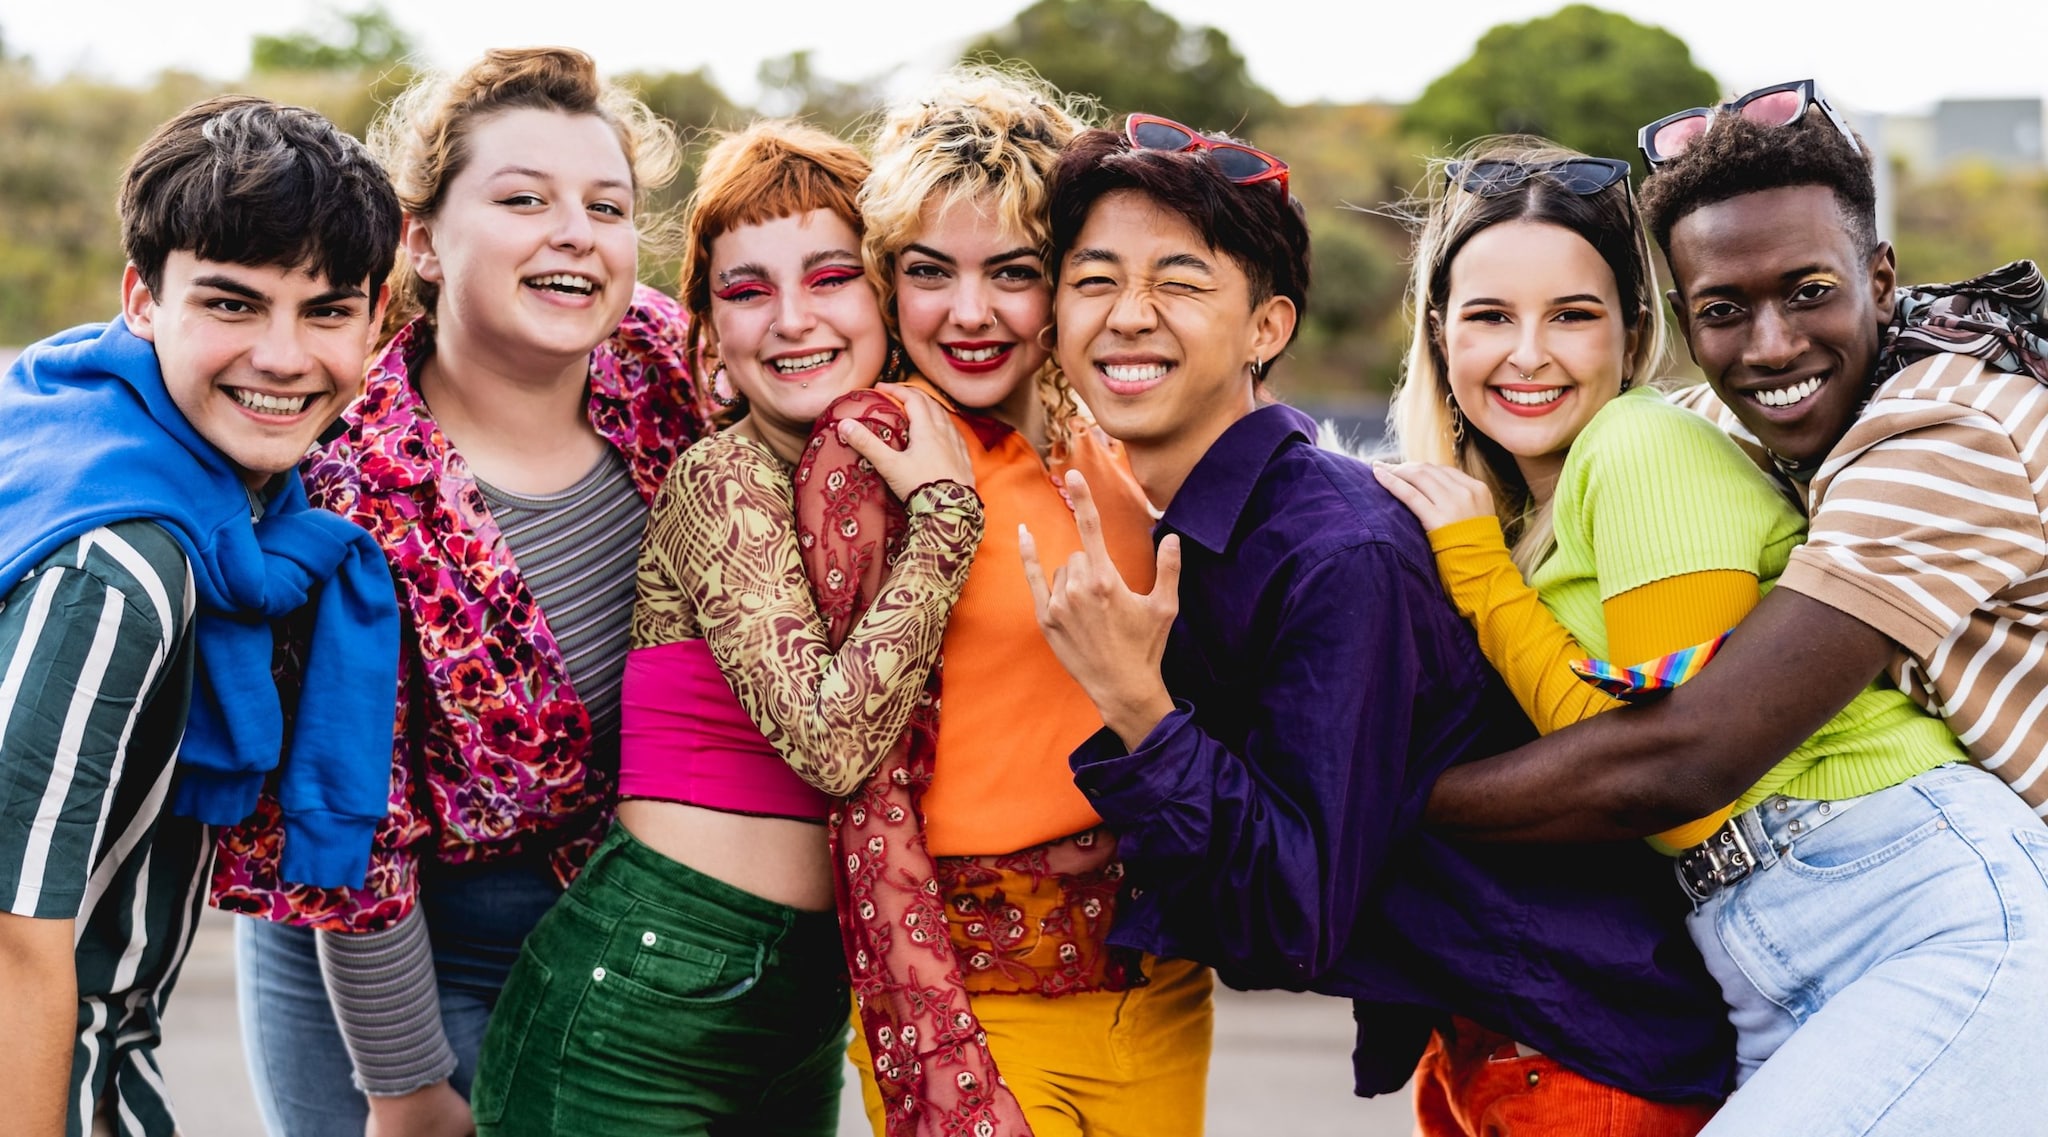 colorful photo of diverse teens smiling